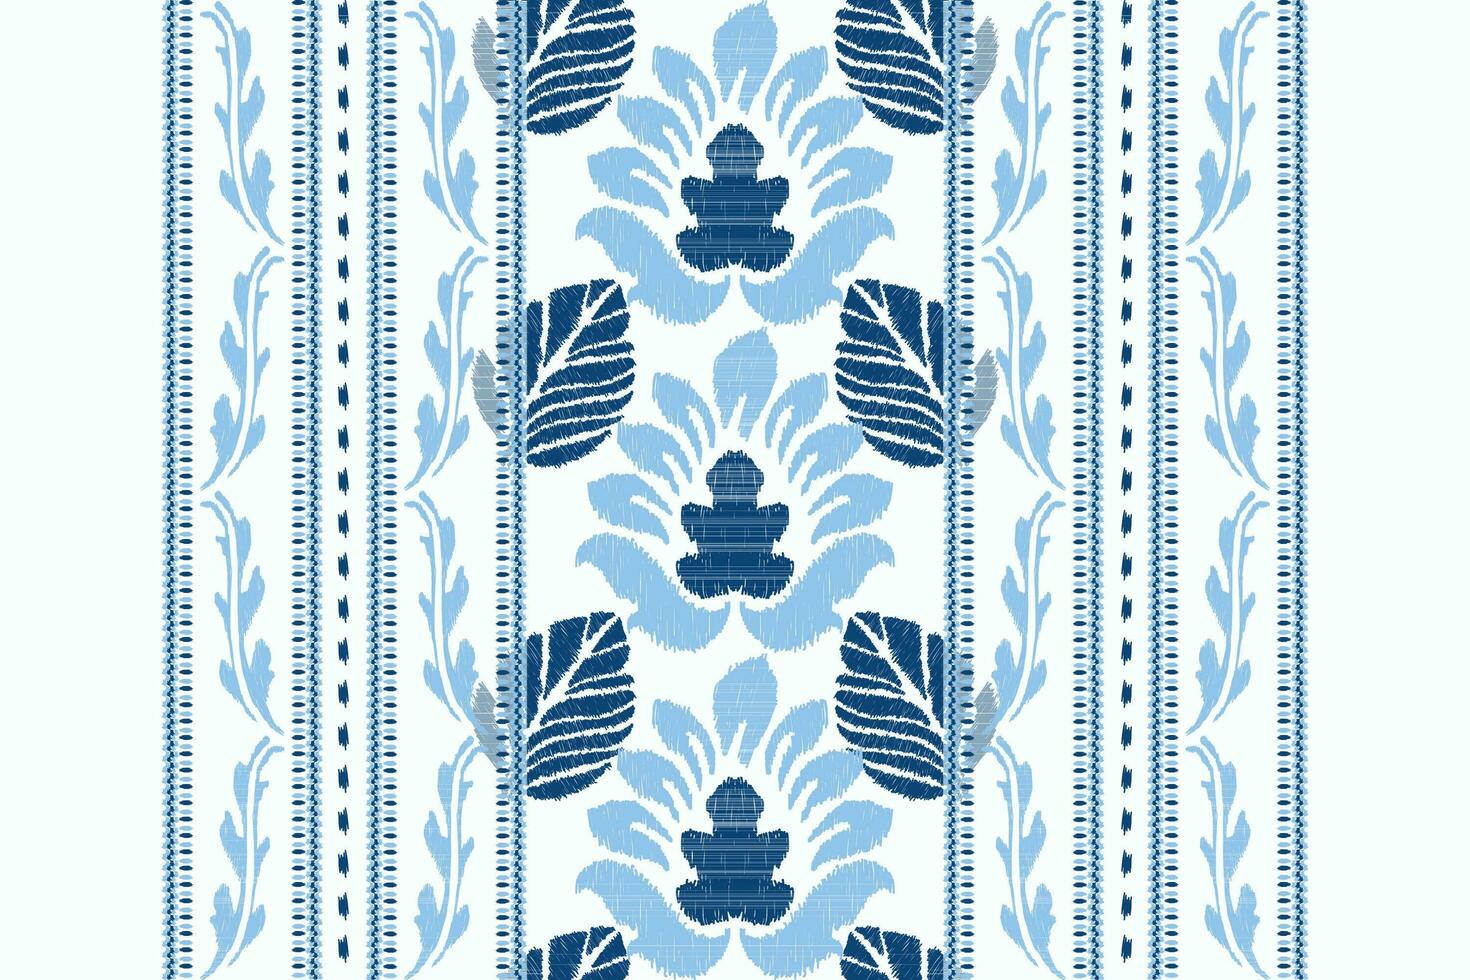 Ikat floral paisley embroidery.blue and white background.Ikat ethnic oriental pattern traditional.Aztec style abstract vector illustration.design for texture,fabric,clothing,wrapping,decoration,scarf.